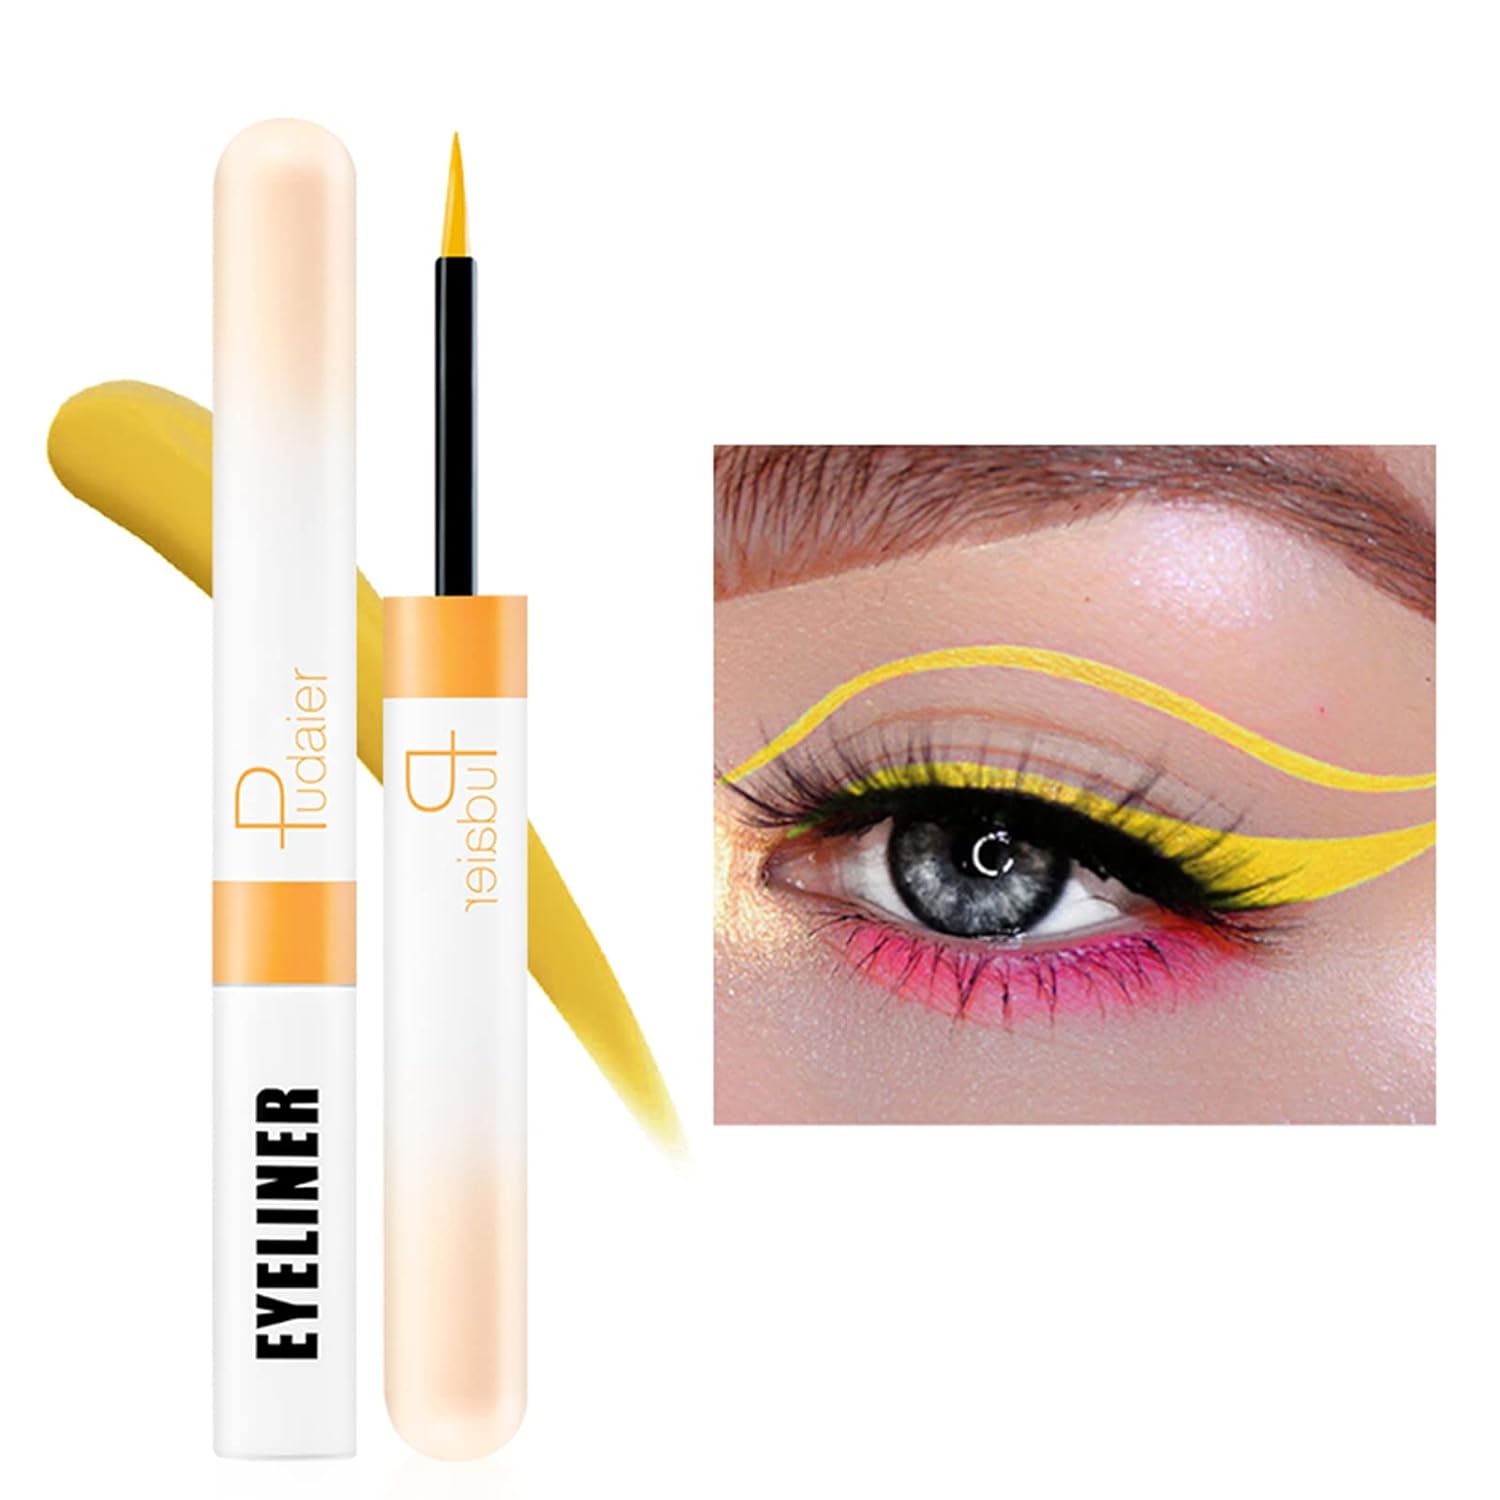 Espoce Liquid Eyeliner, Yellow Eyeliner Liquid Liner Quick-Drying, Ultra-Fine Long-lasting Colored Eyeliners High-pigmented Colorful Eyeliners for Eye Makeup 0.12  (Yellow)